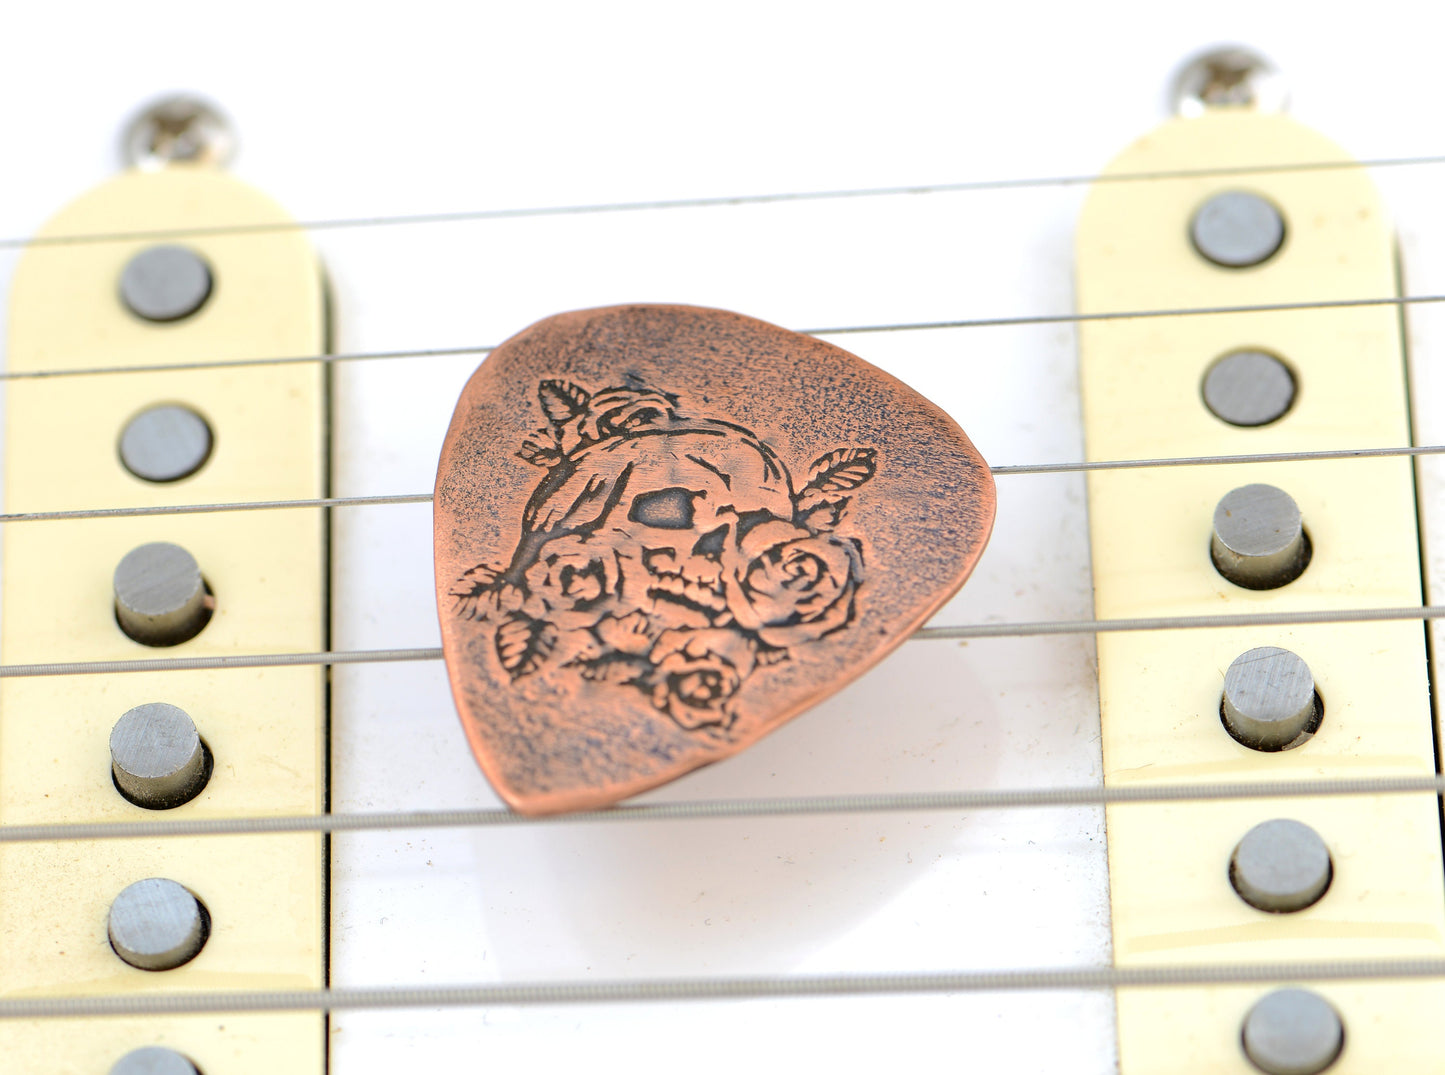 Guitar pick in copper with skull and roses